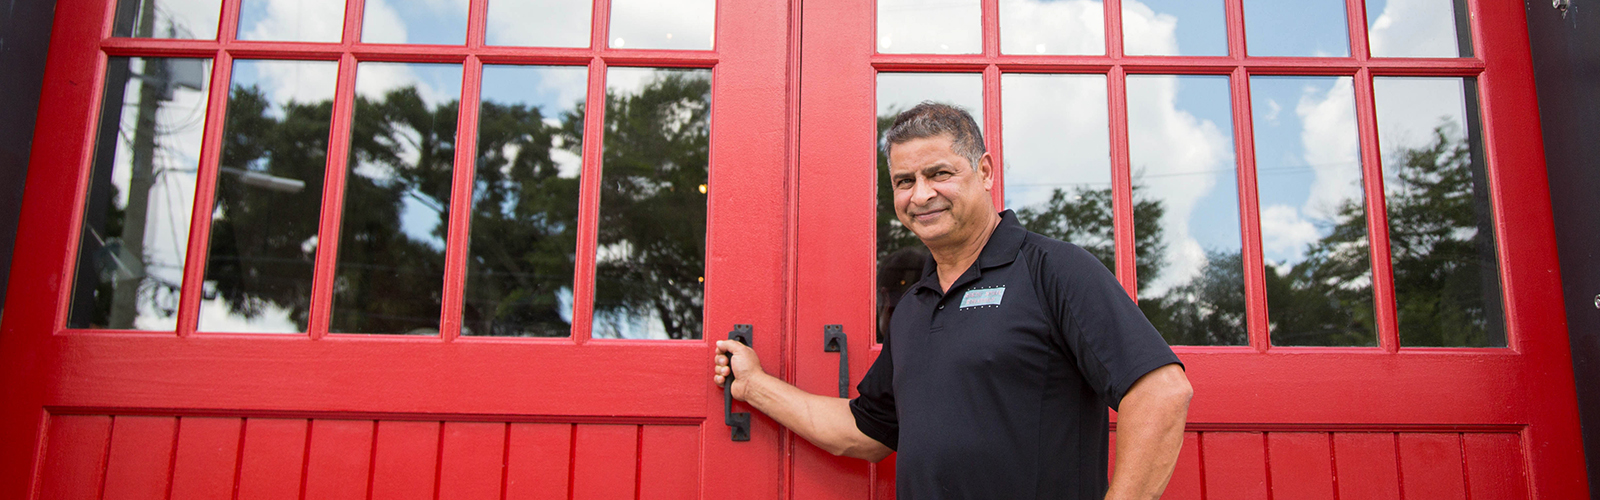 Dominique Martinez at his event space Red Door No. 5 in Tampa Heights.